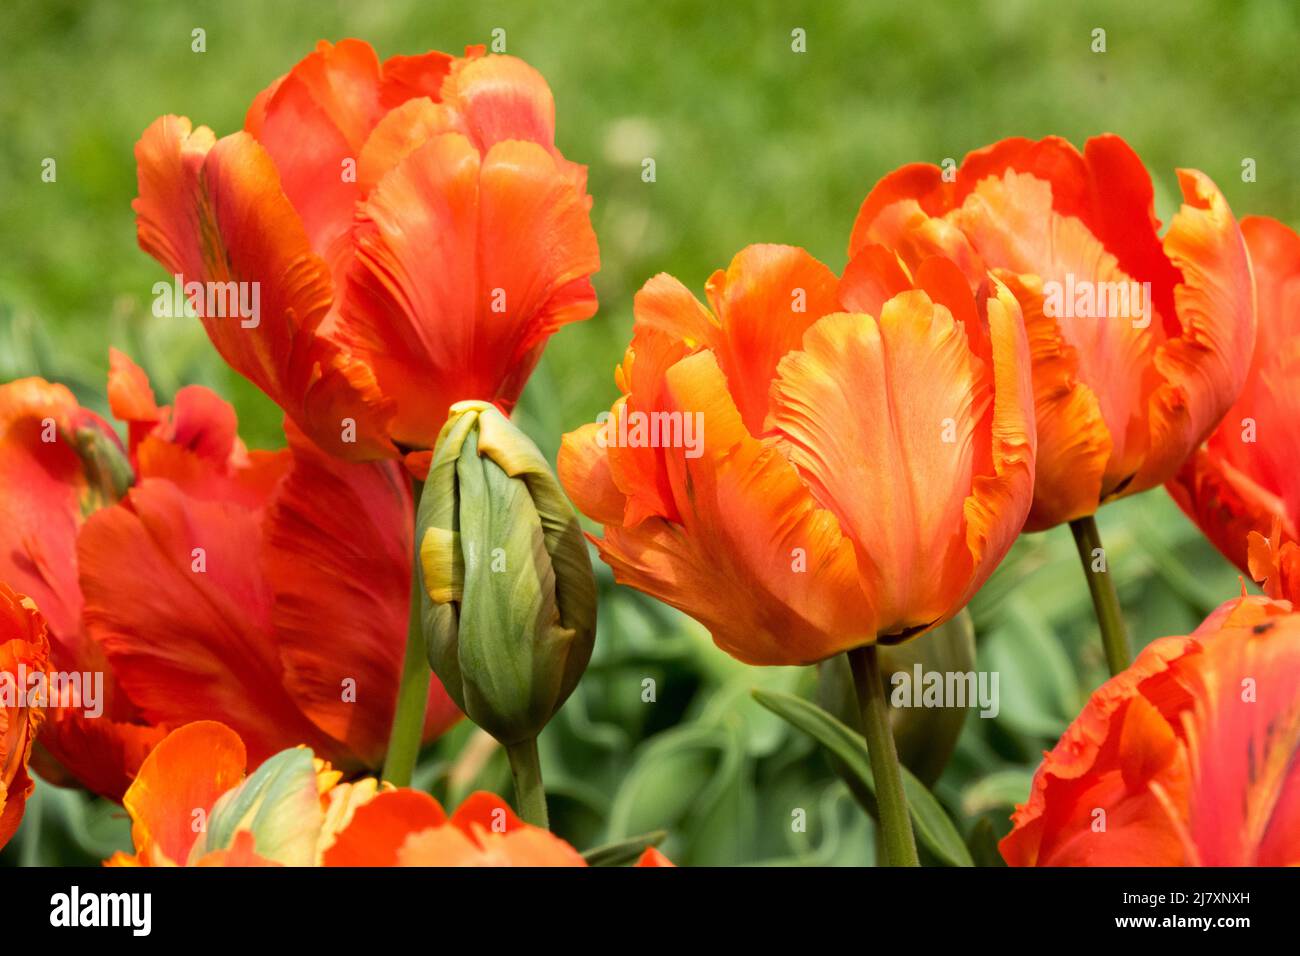 Tulips 'Flower Power' Red Parrot Tulip Stock Photo